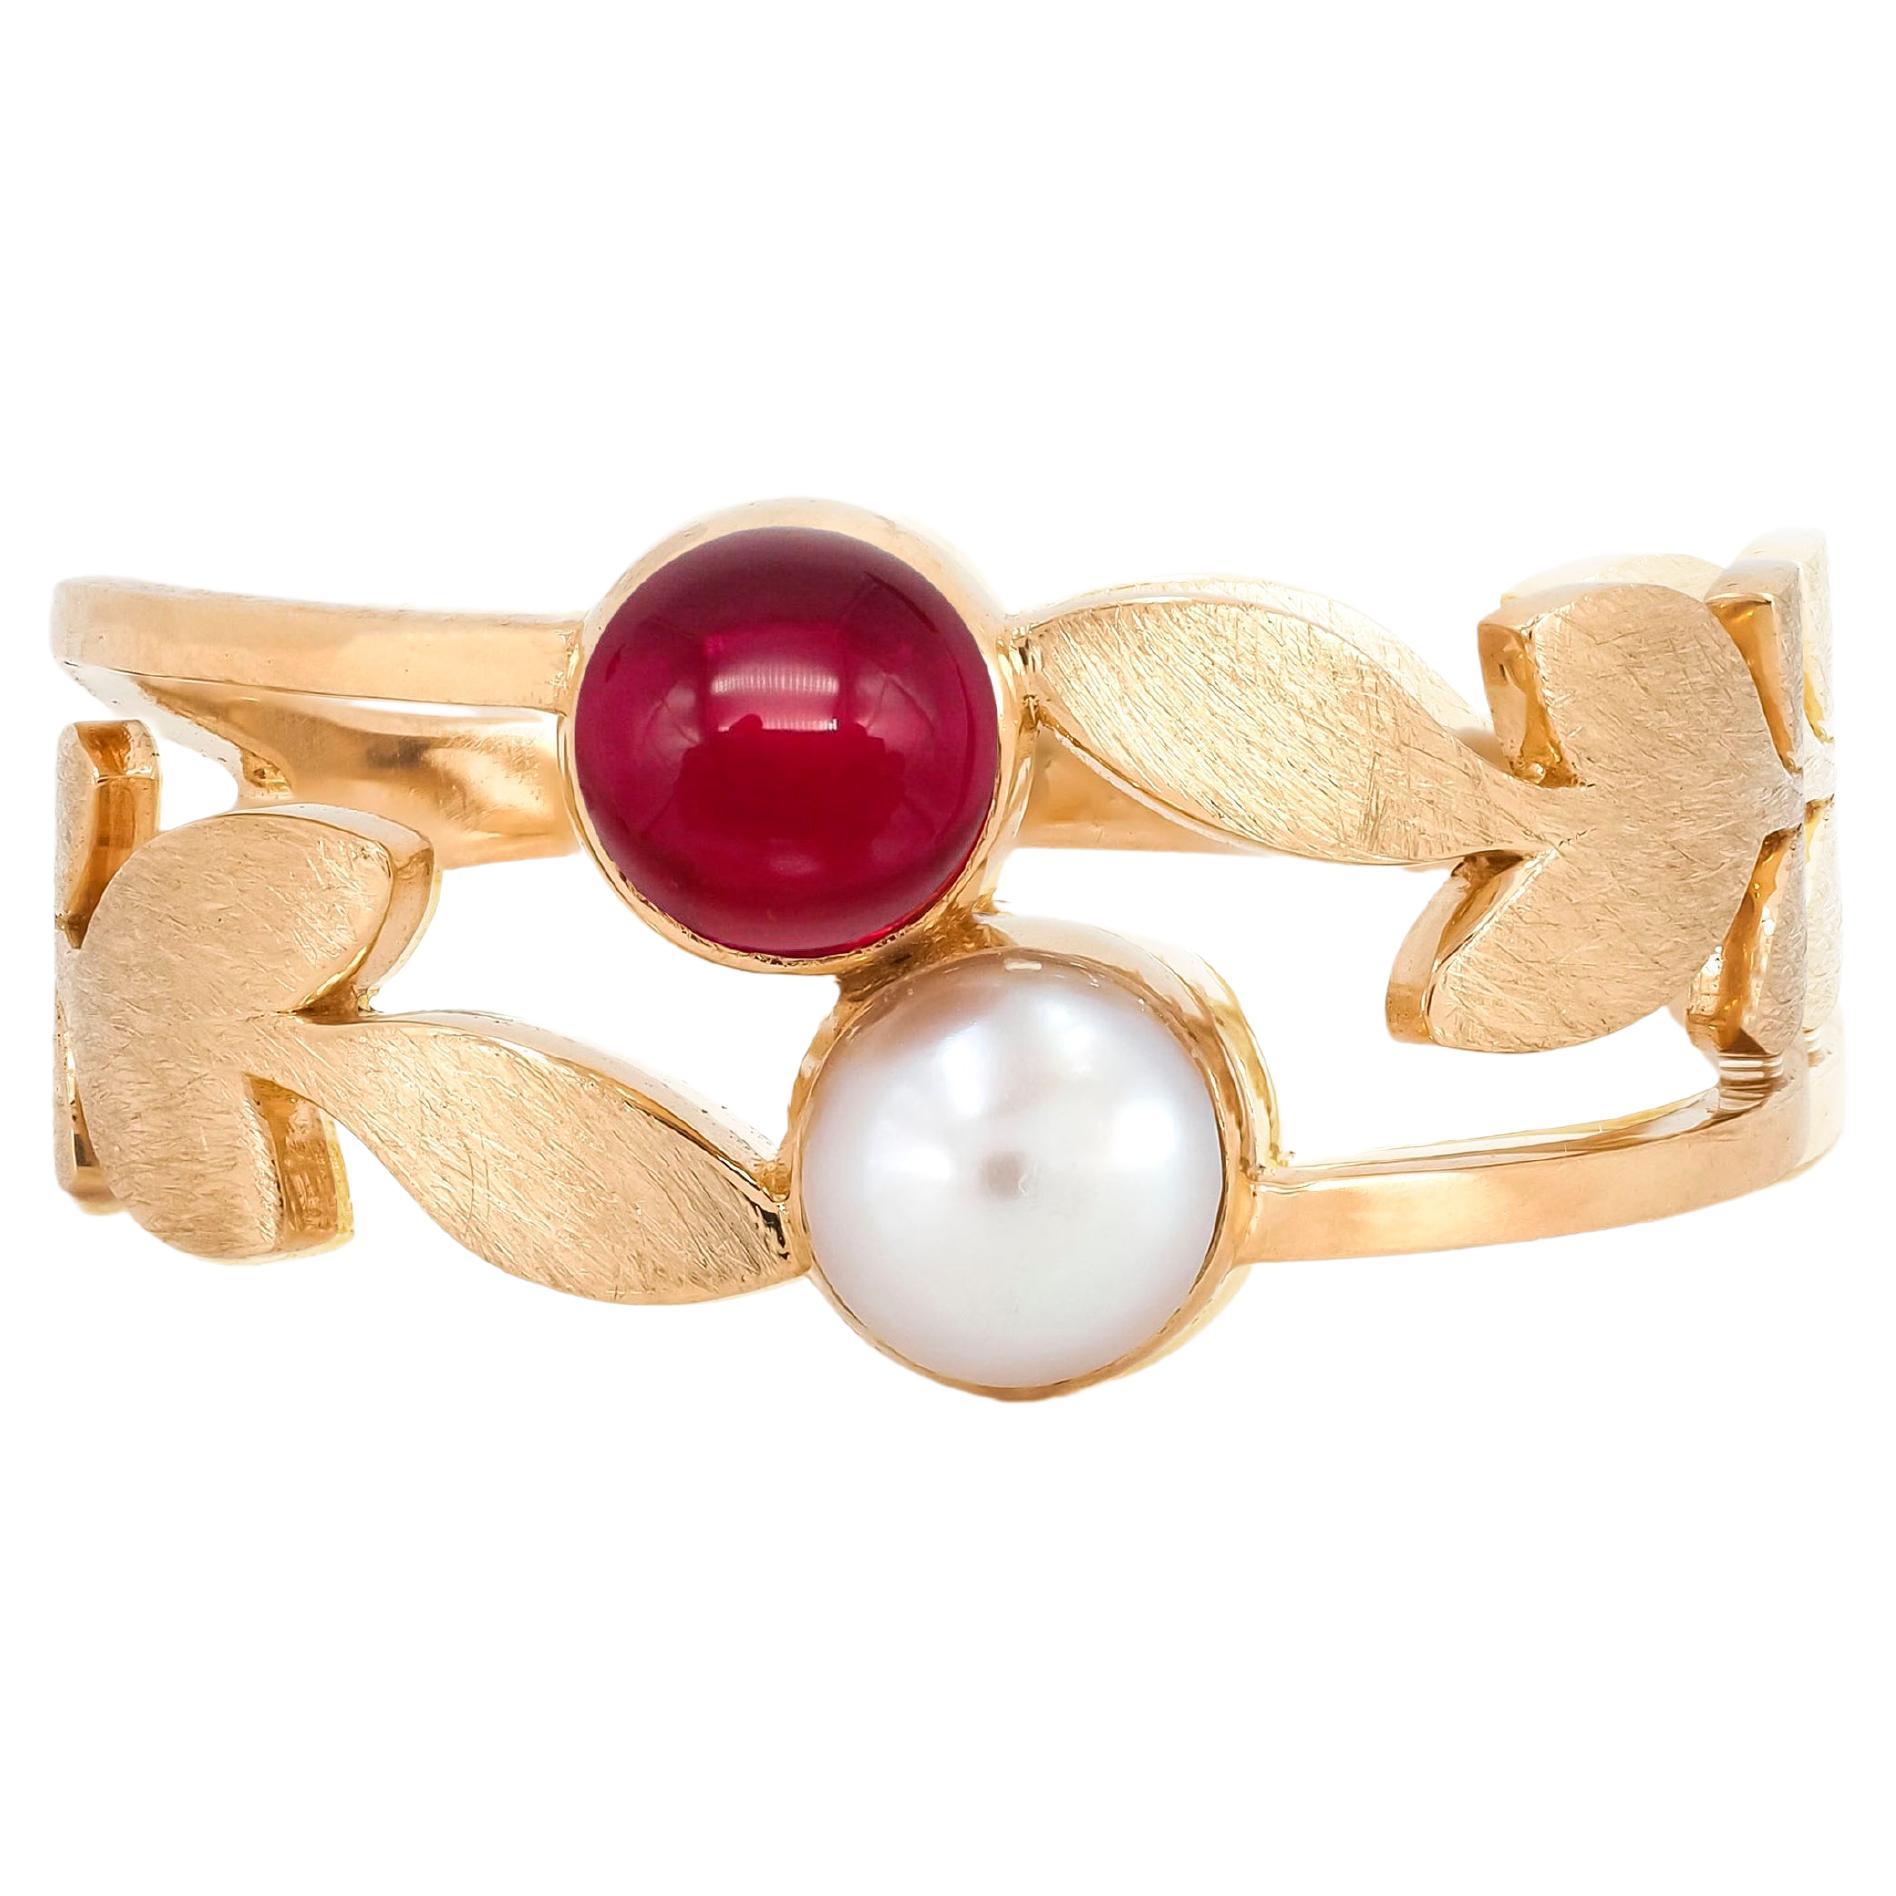 14 Karat Gold Ring with Ruby and Pearl. Ruby ring. July birthstone ruby ring.